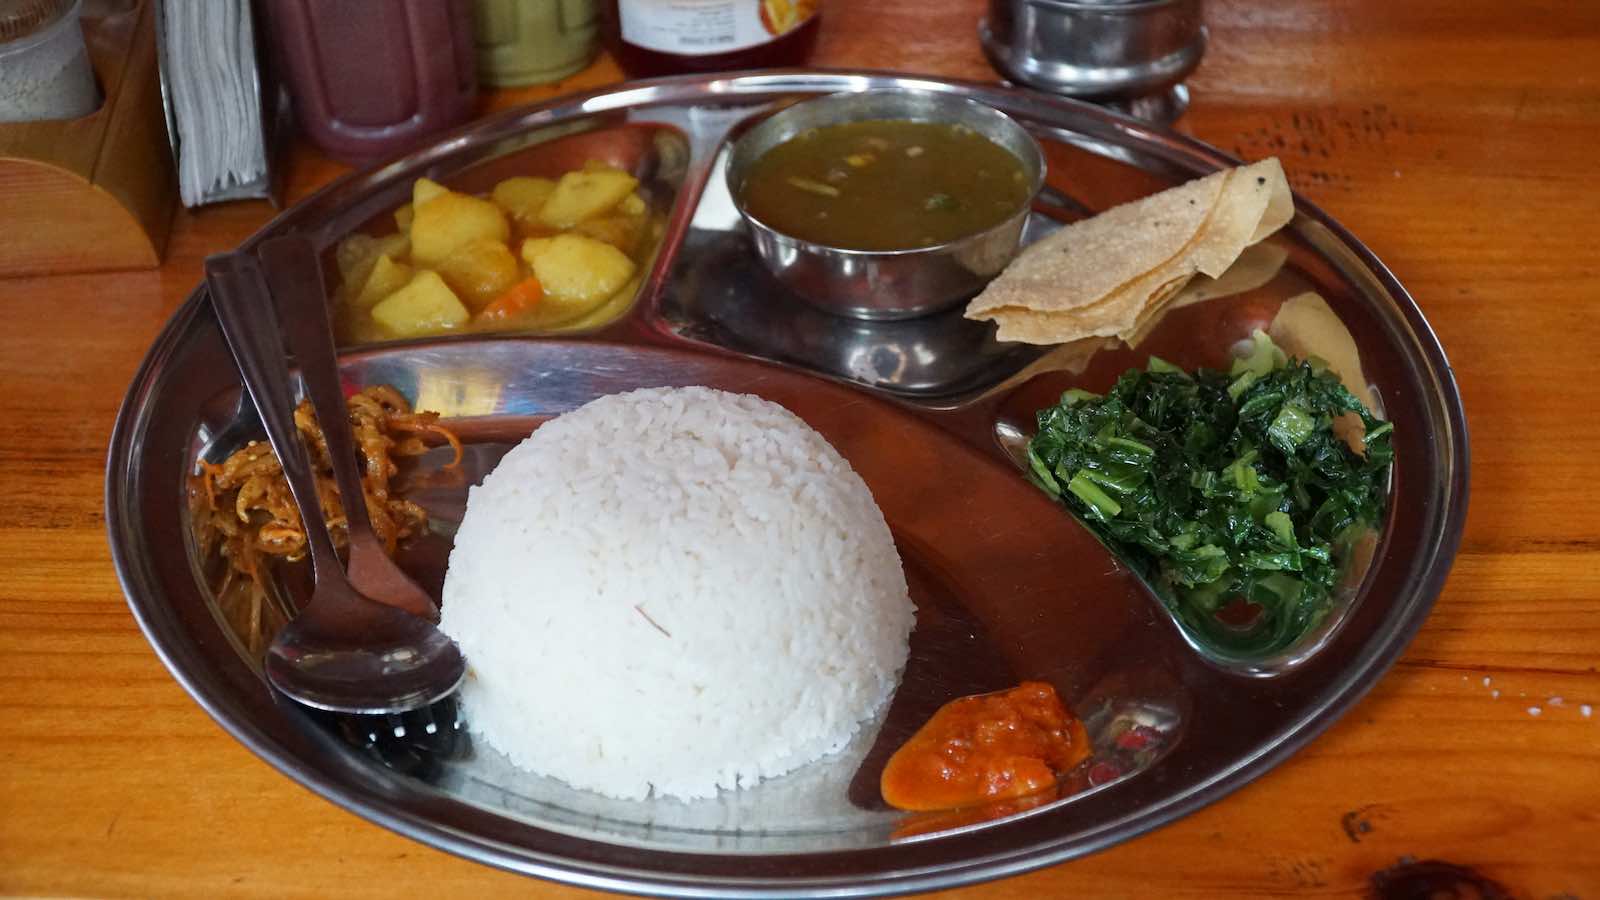 My most consumed meal in Kathmandu and later on in the mountains: Dal Bhat. The best part was that you get free refills of most of the sides, great when you're hungry.